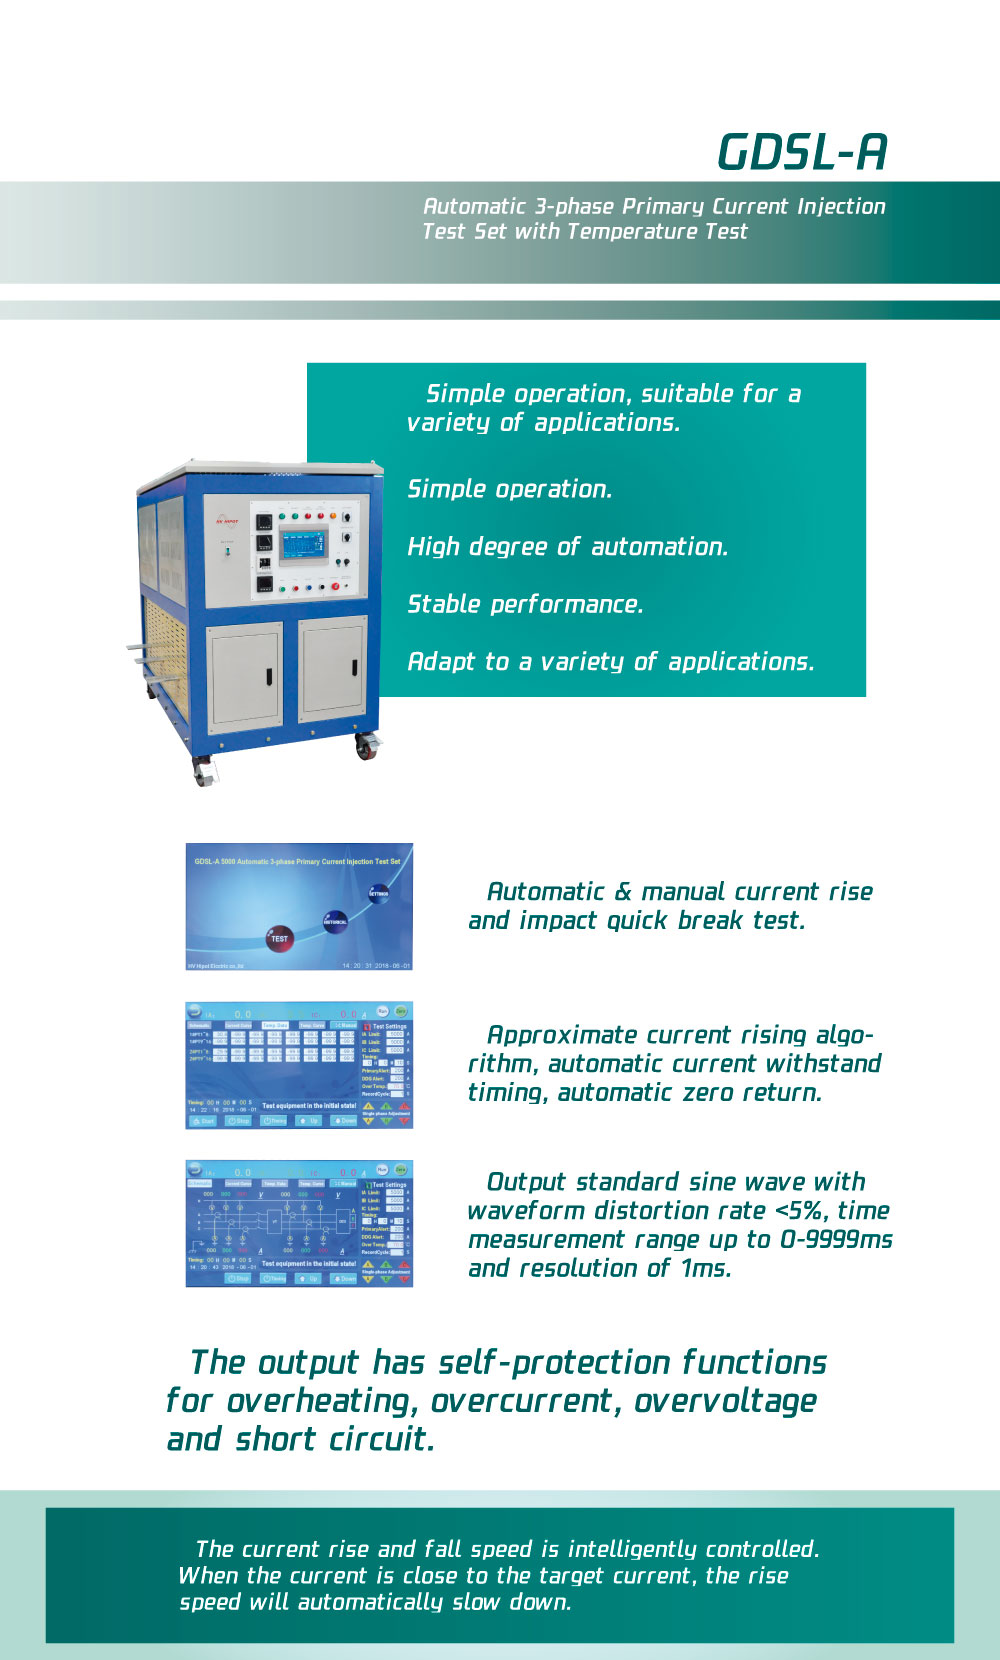 GDSL-A 3-phase Primary Current Injection Test Set with Temperature Test